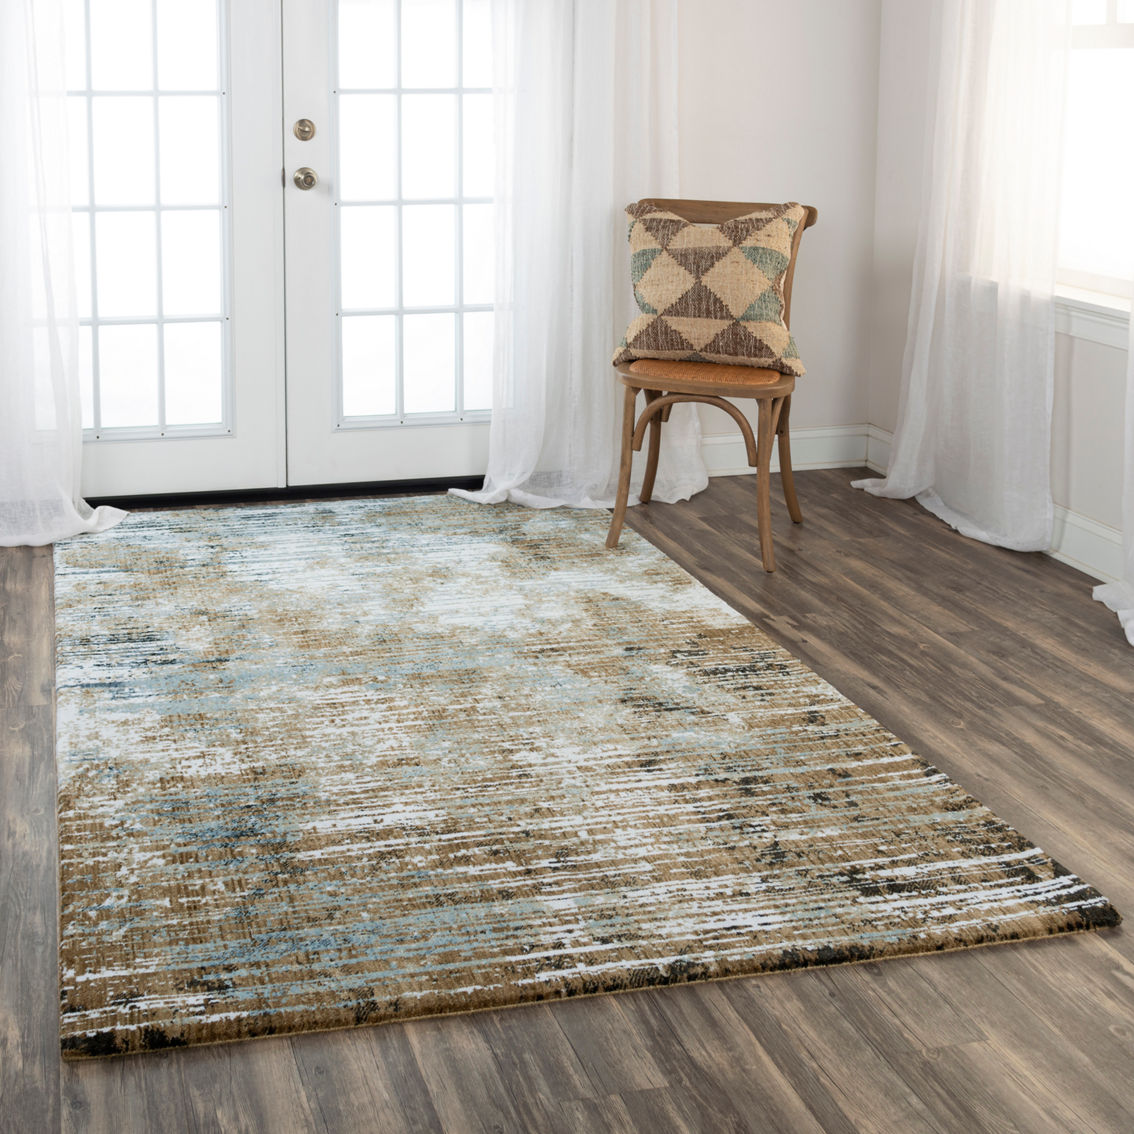 Rizzy Home Elite Brown Recycled Polyester Hybrid Area Rug - Image 5 of 6